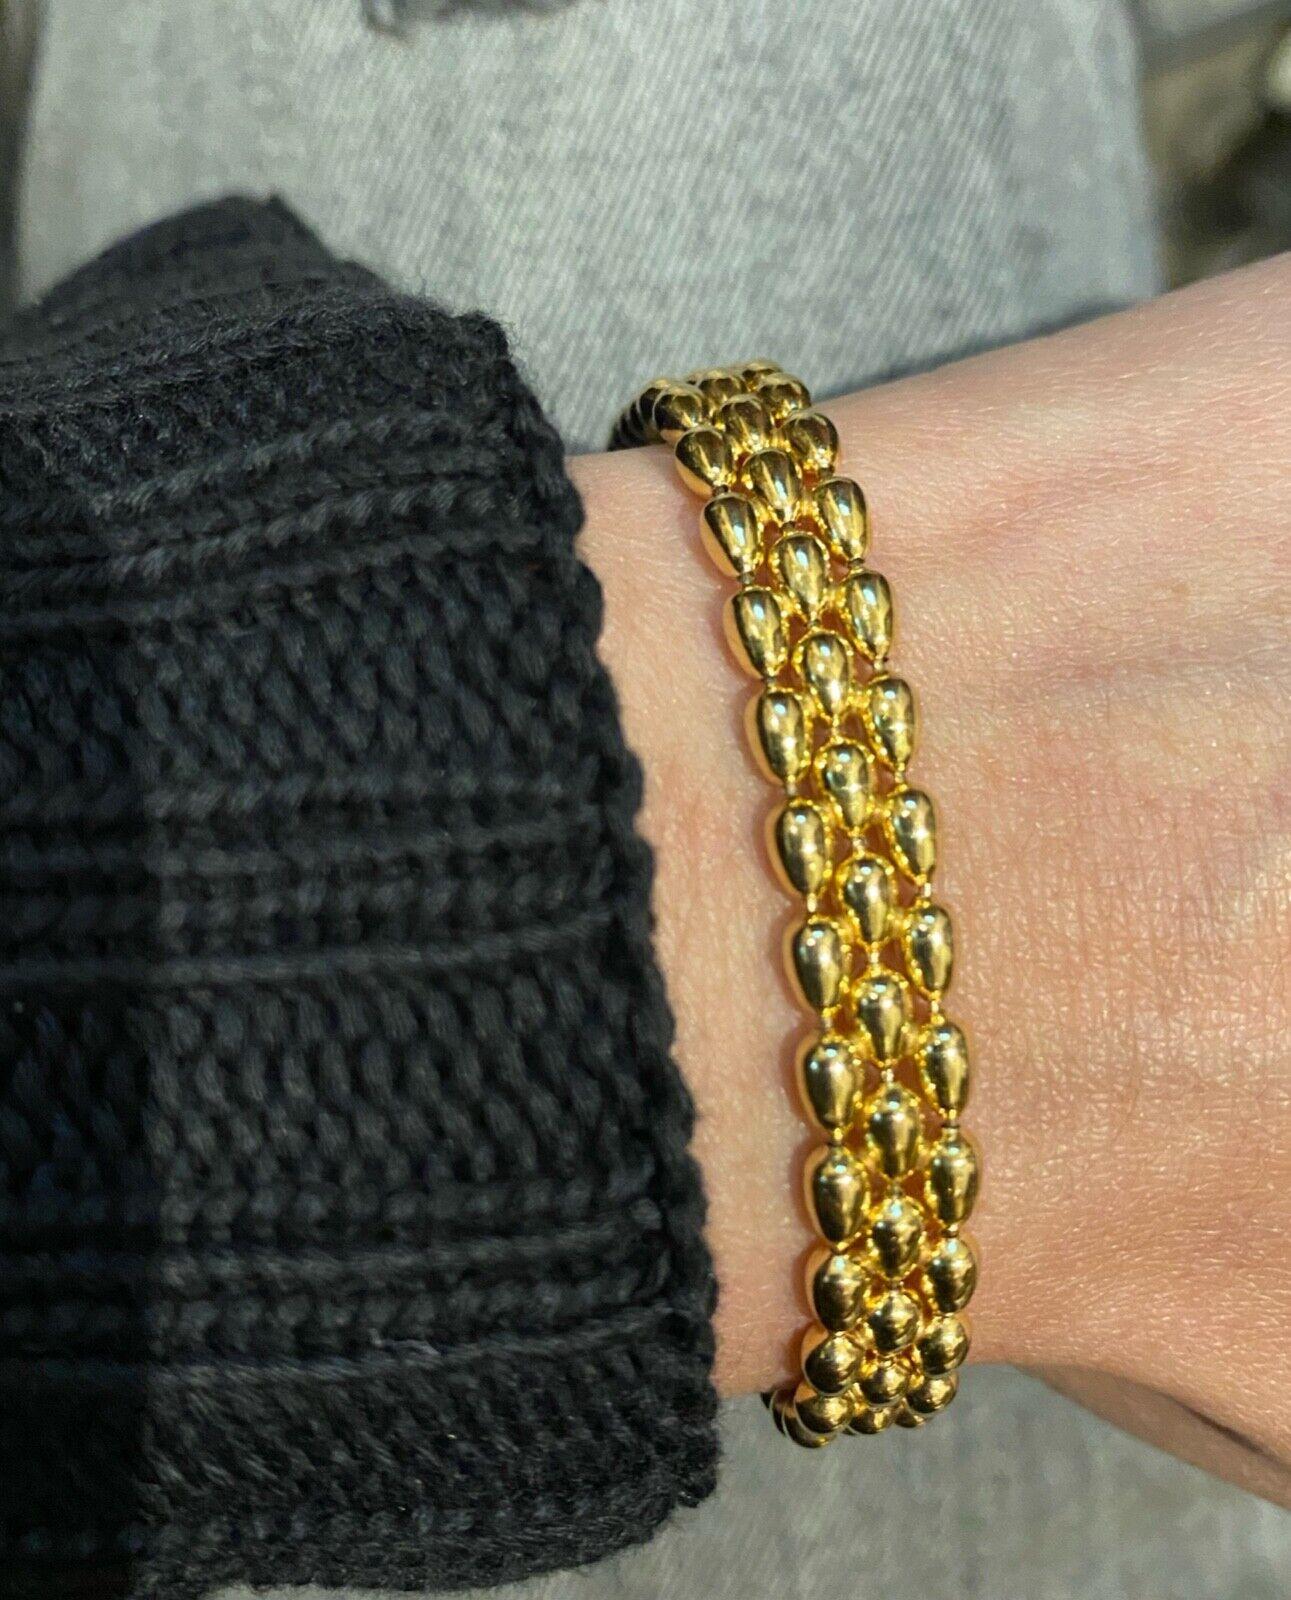 Women's or Men's Superb 9Kt Yellow Gold Italian Panther Link Bracelet, c2000s. Mint Condition. For Sale